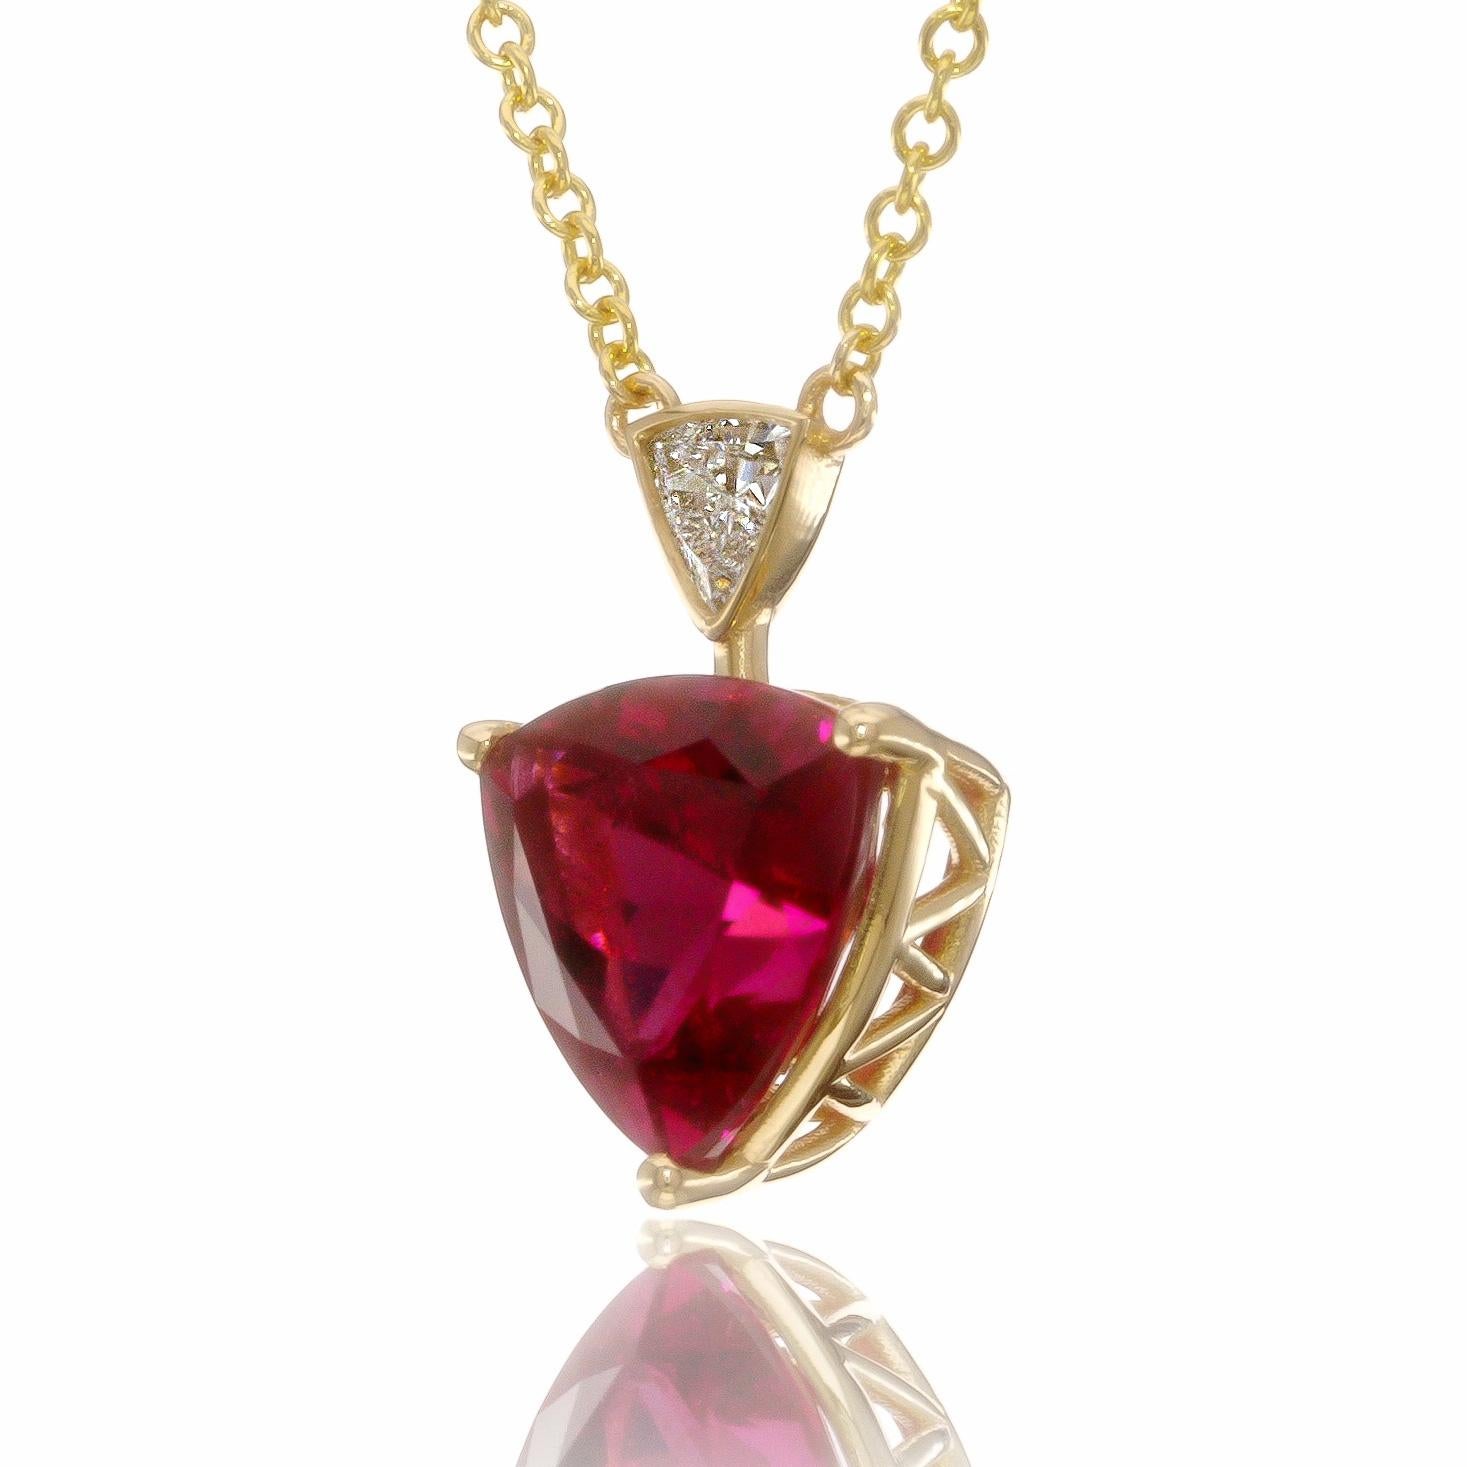 This 14K yellow gold pendant featuring a stunning rubellite gemstone is truly extraordinary. The gemstone, known for its vivid pink to red hues, is cut into a distinct triangular shape, resembling a triangle. This unique cut, often referred to as a